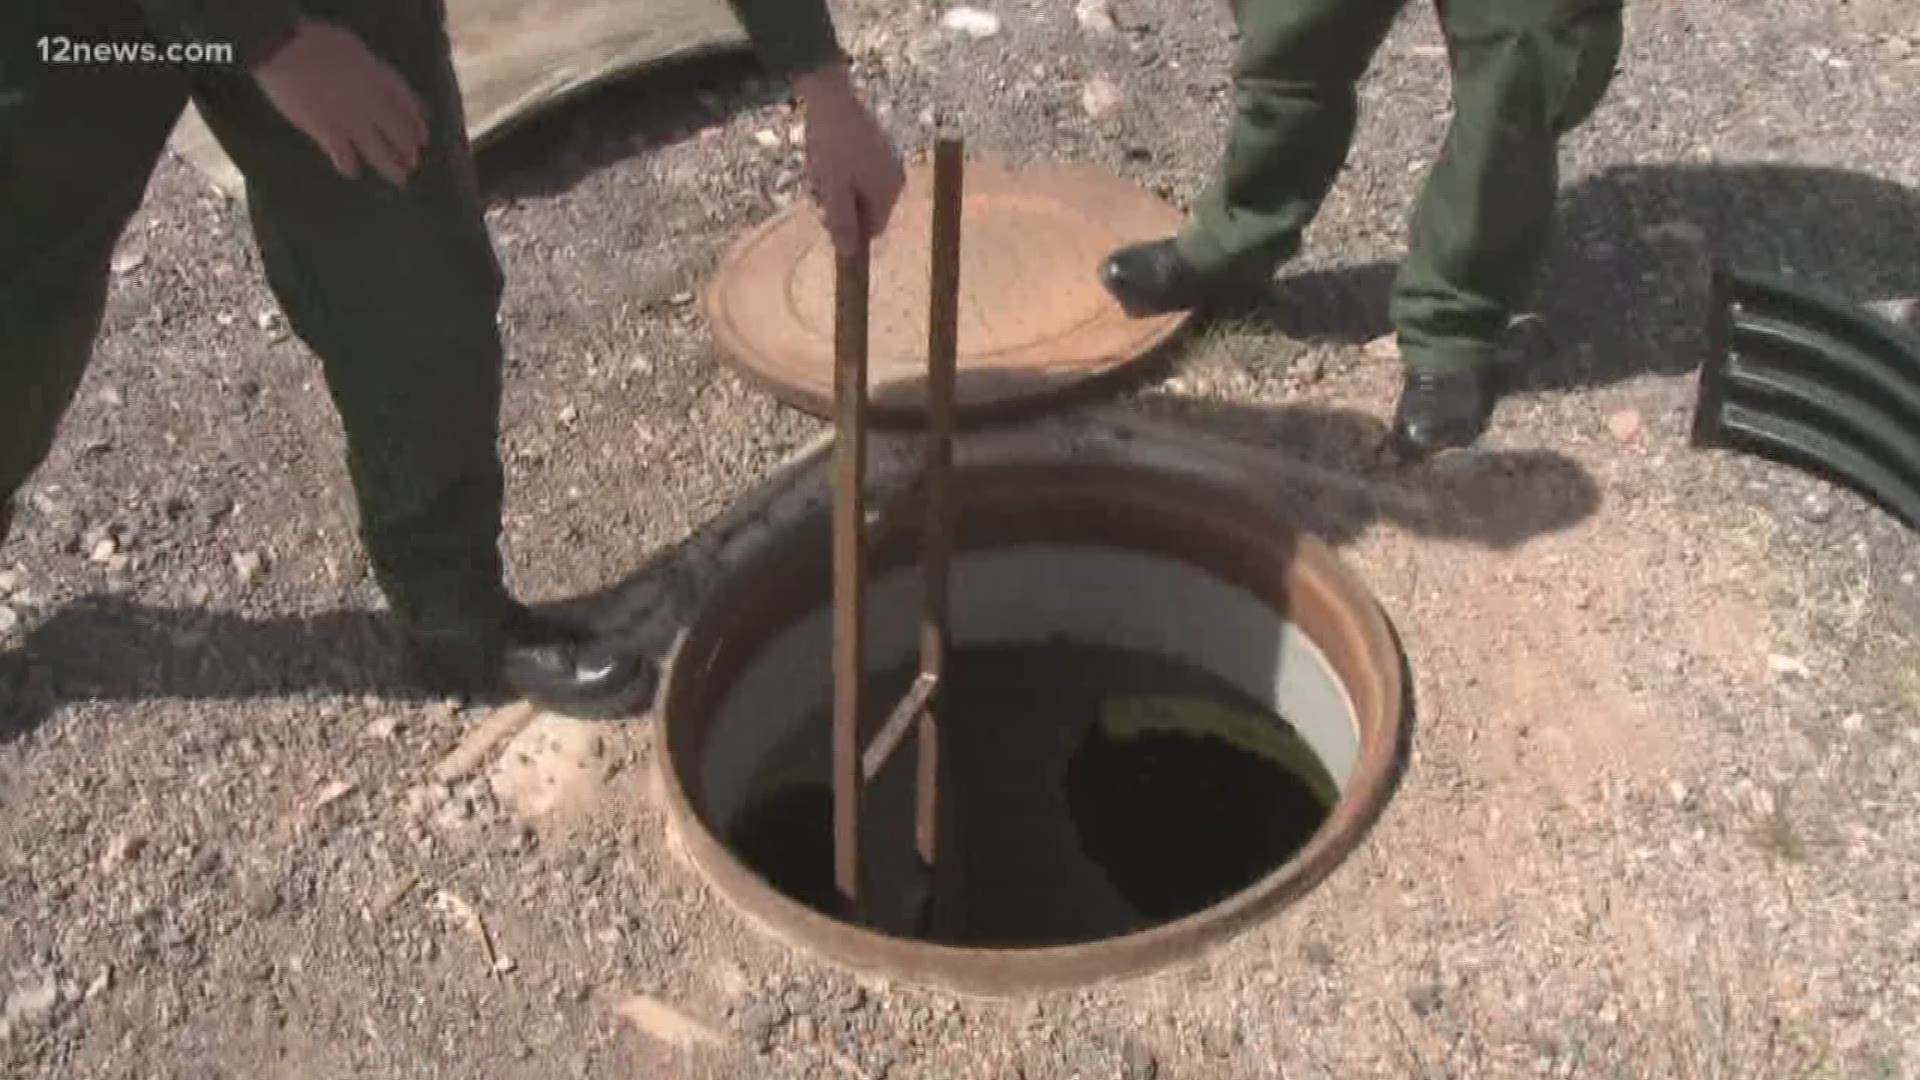 We go inside a facility in Tucson that trains border patrol agents on how to detect drug tunnels. Agents go through the training once a month.